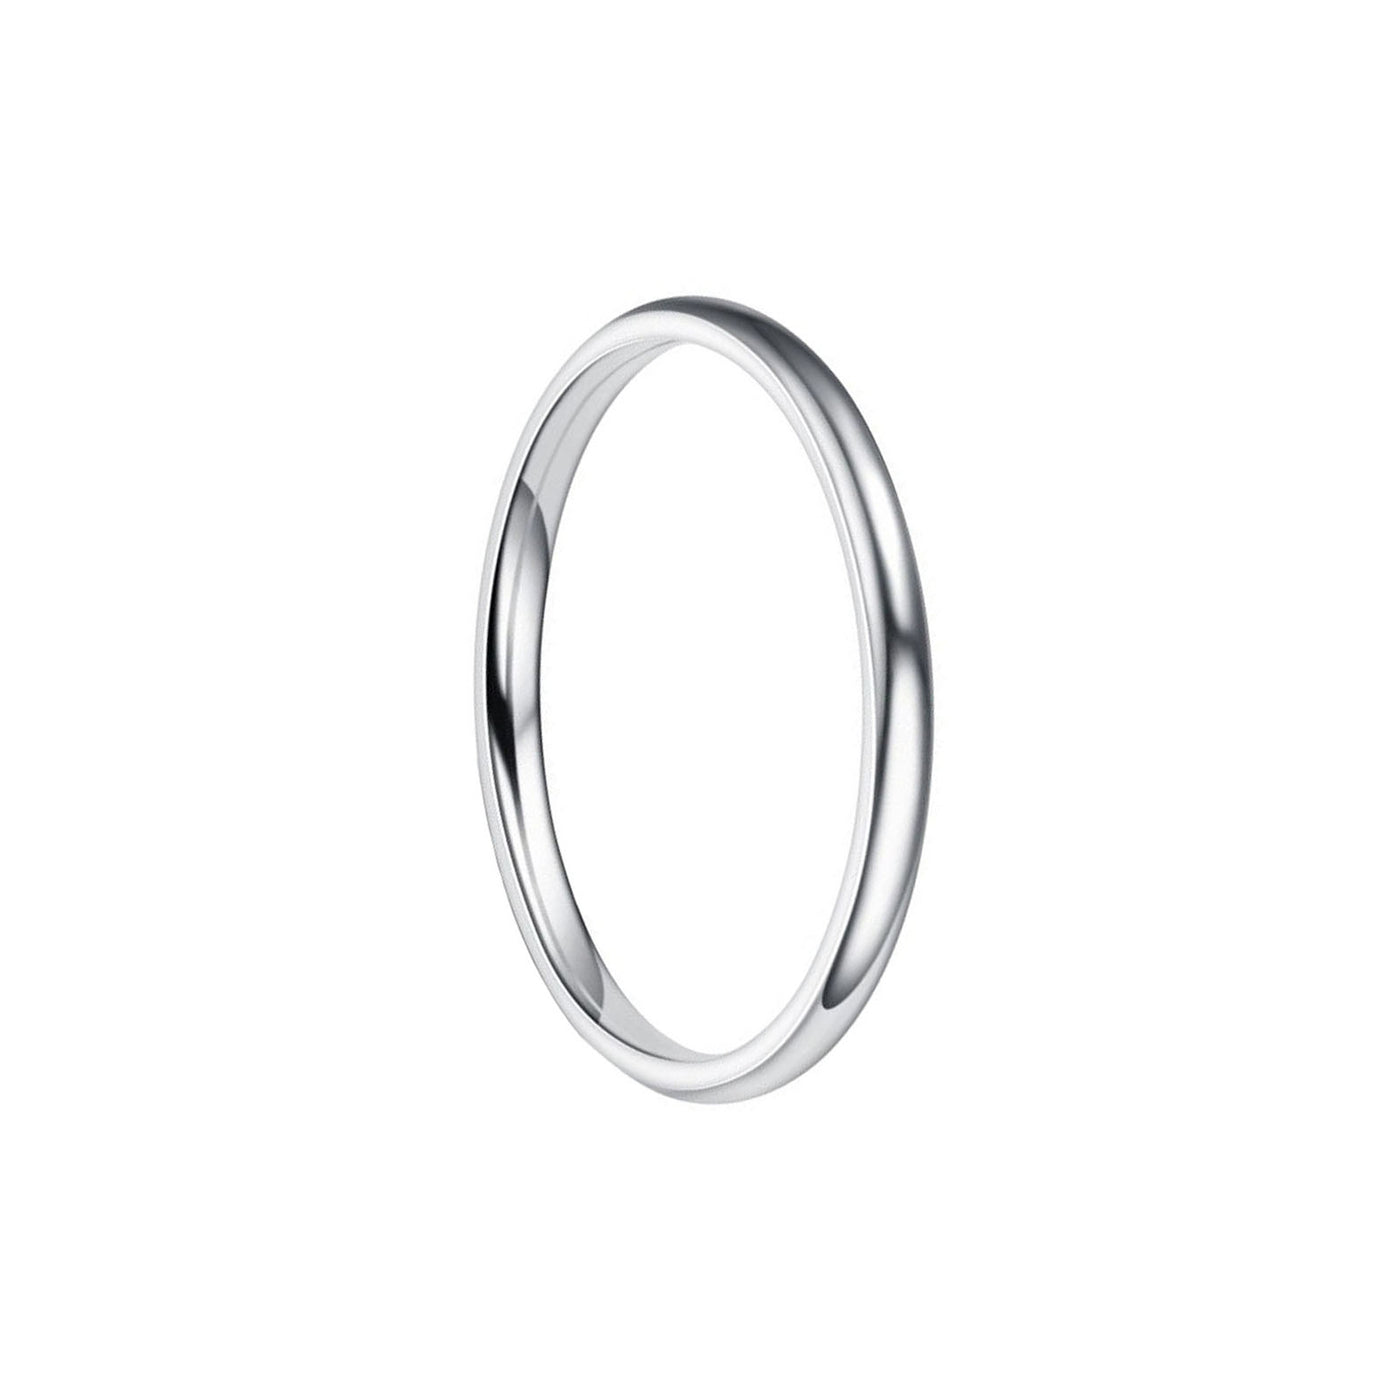 Curved thin steel ring 2mm